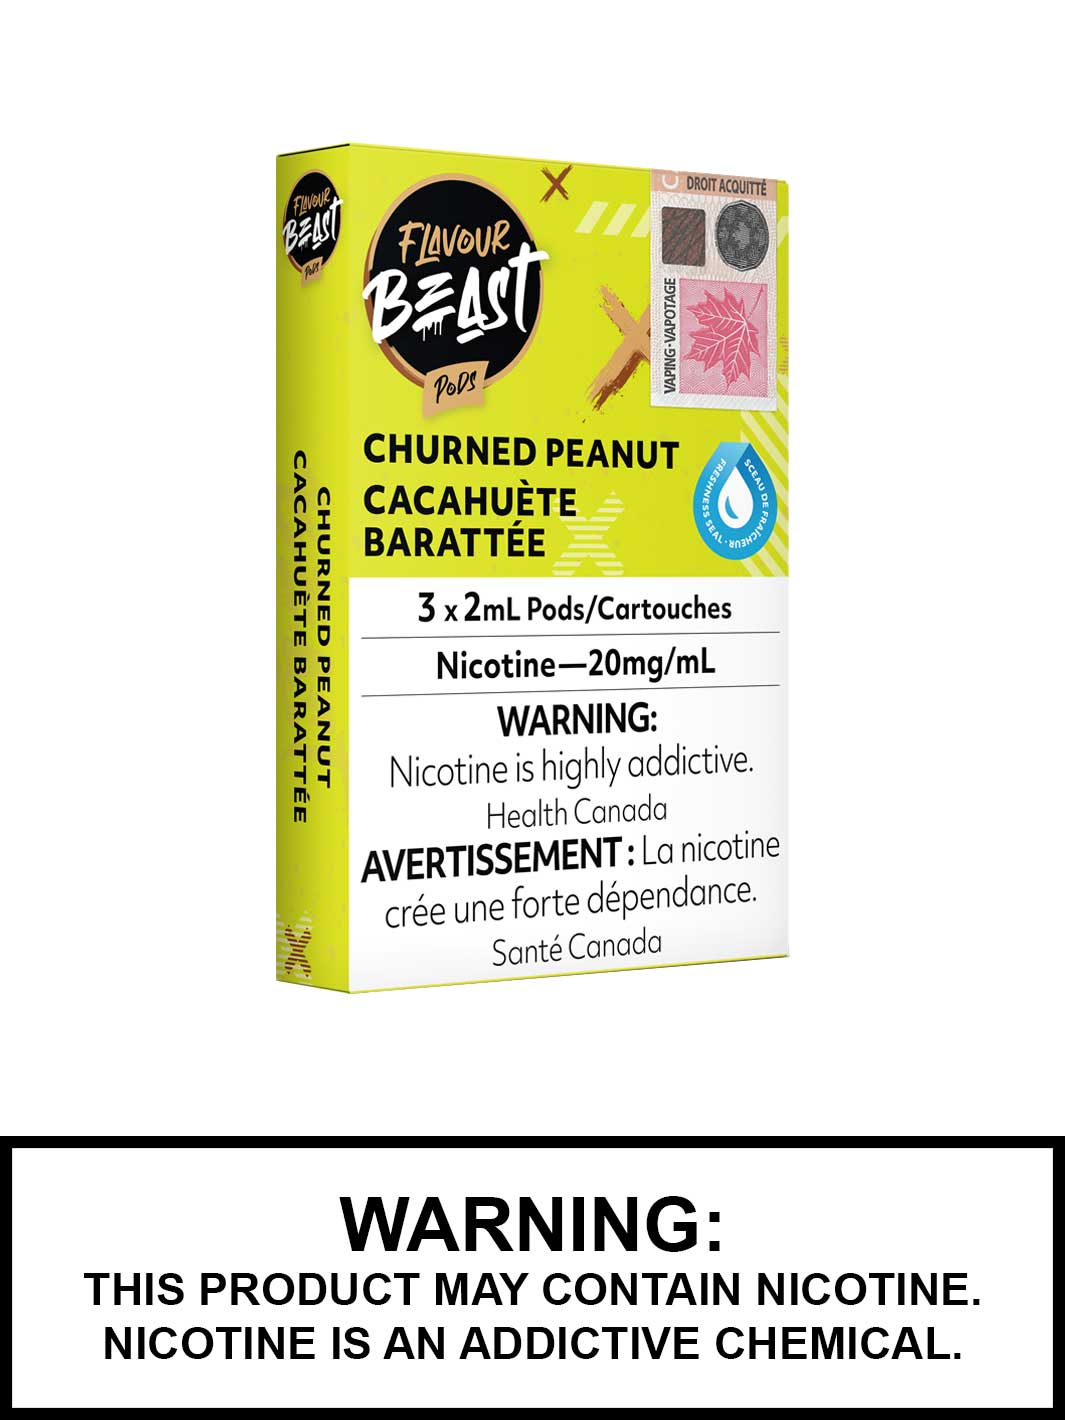 Churned Peanut Flavour Beast Pods, STLTH Compatible Pods., Vape360 Canada